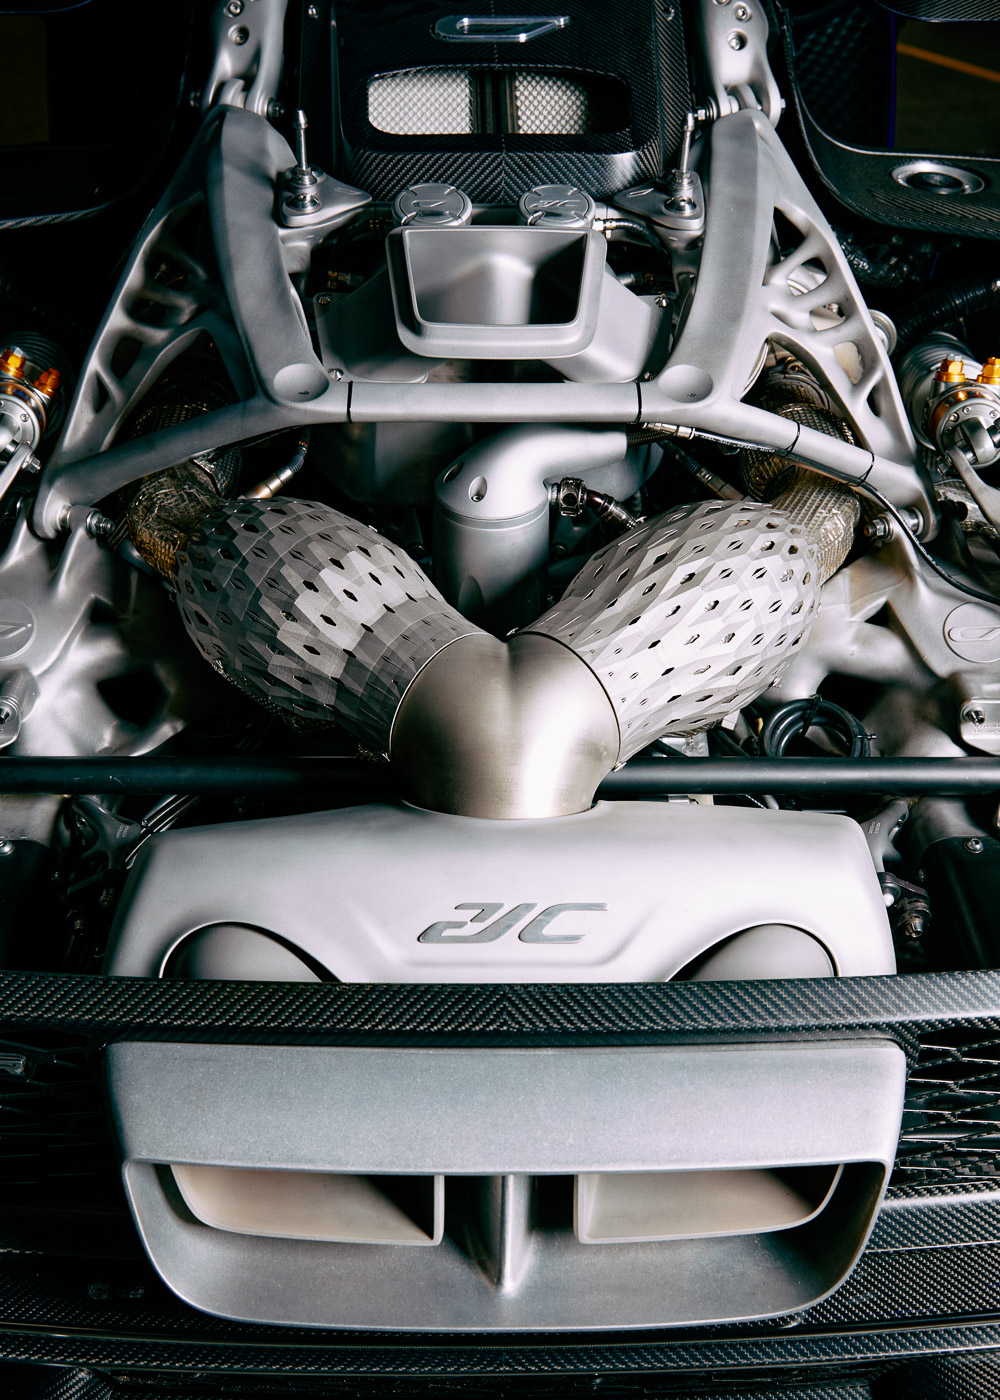 3D printed engine of the 21C Hypercar